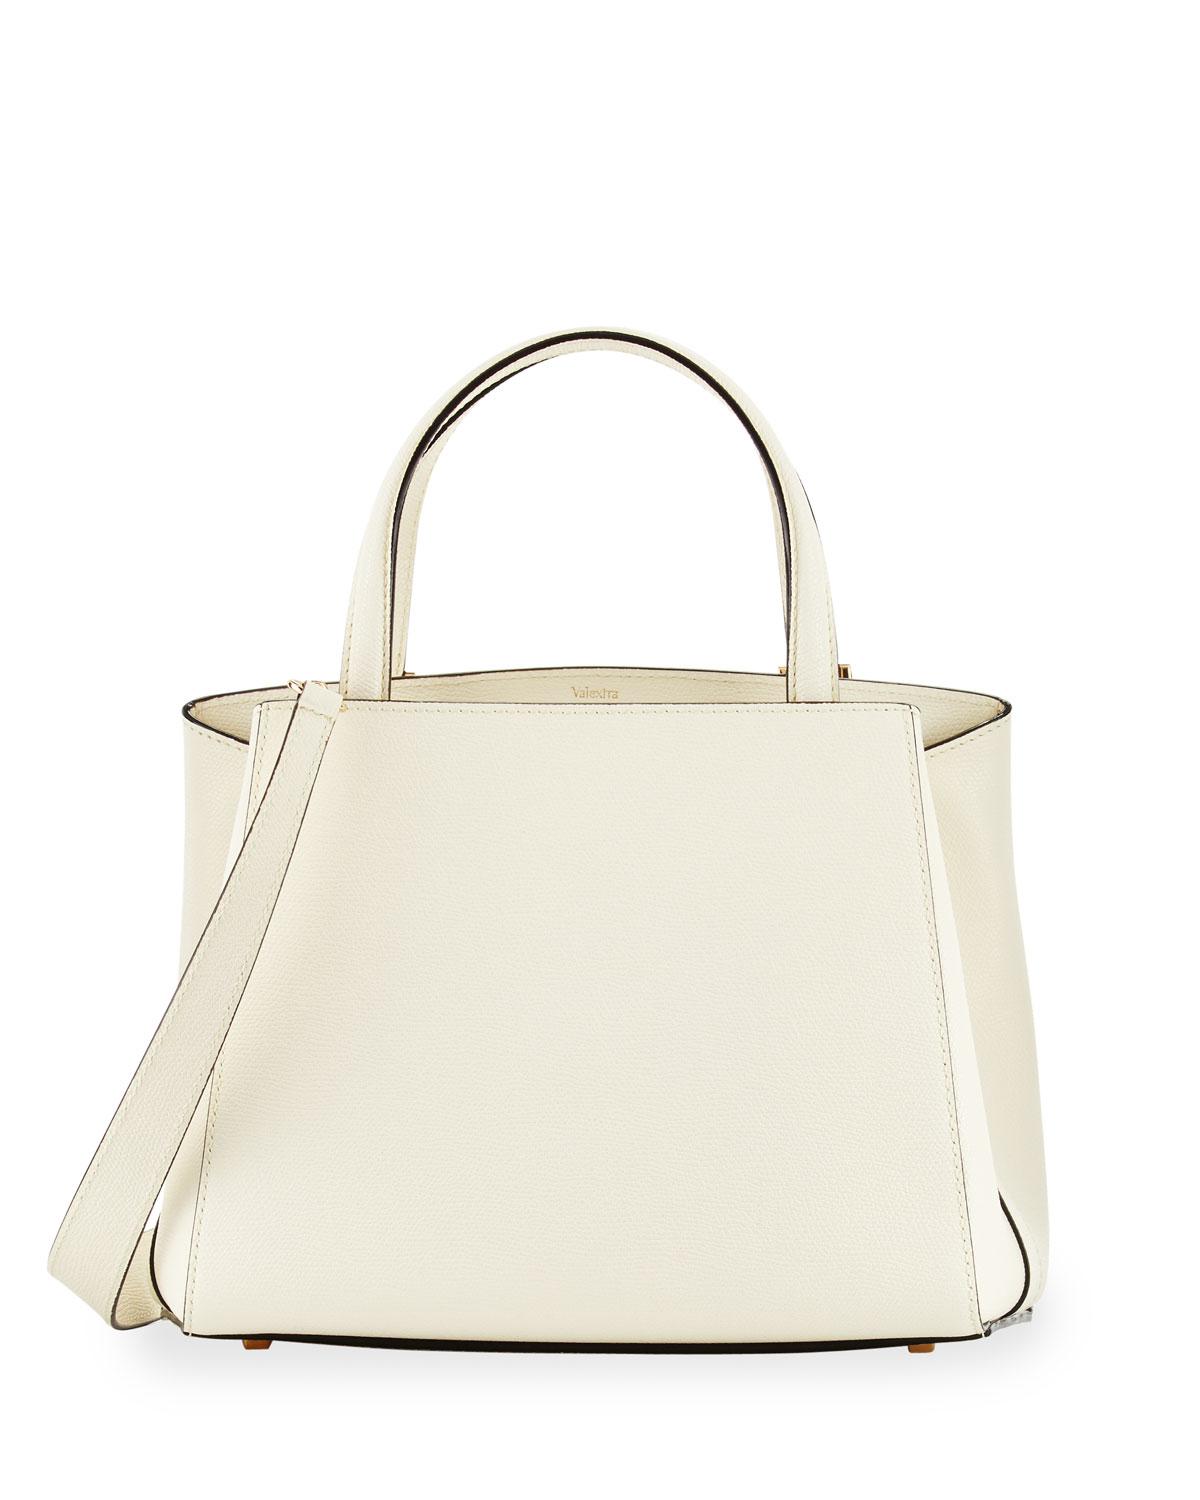 Lyst - Valextra Triennale Small Leather Tote Bag in White